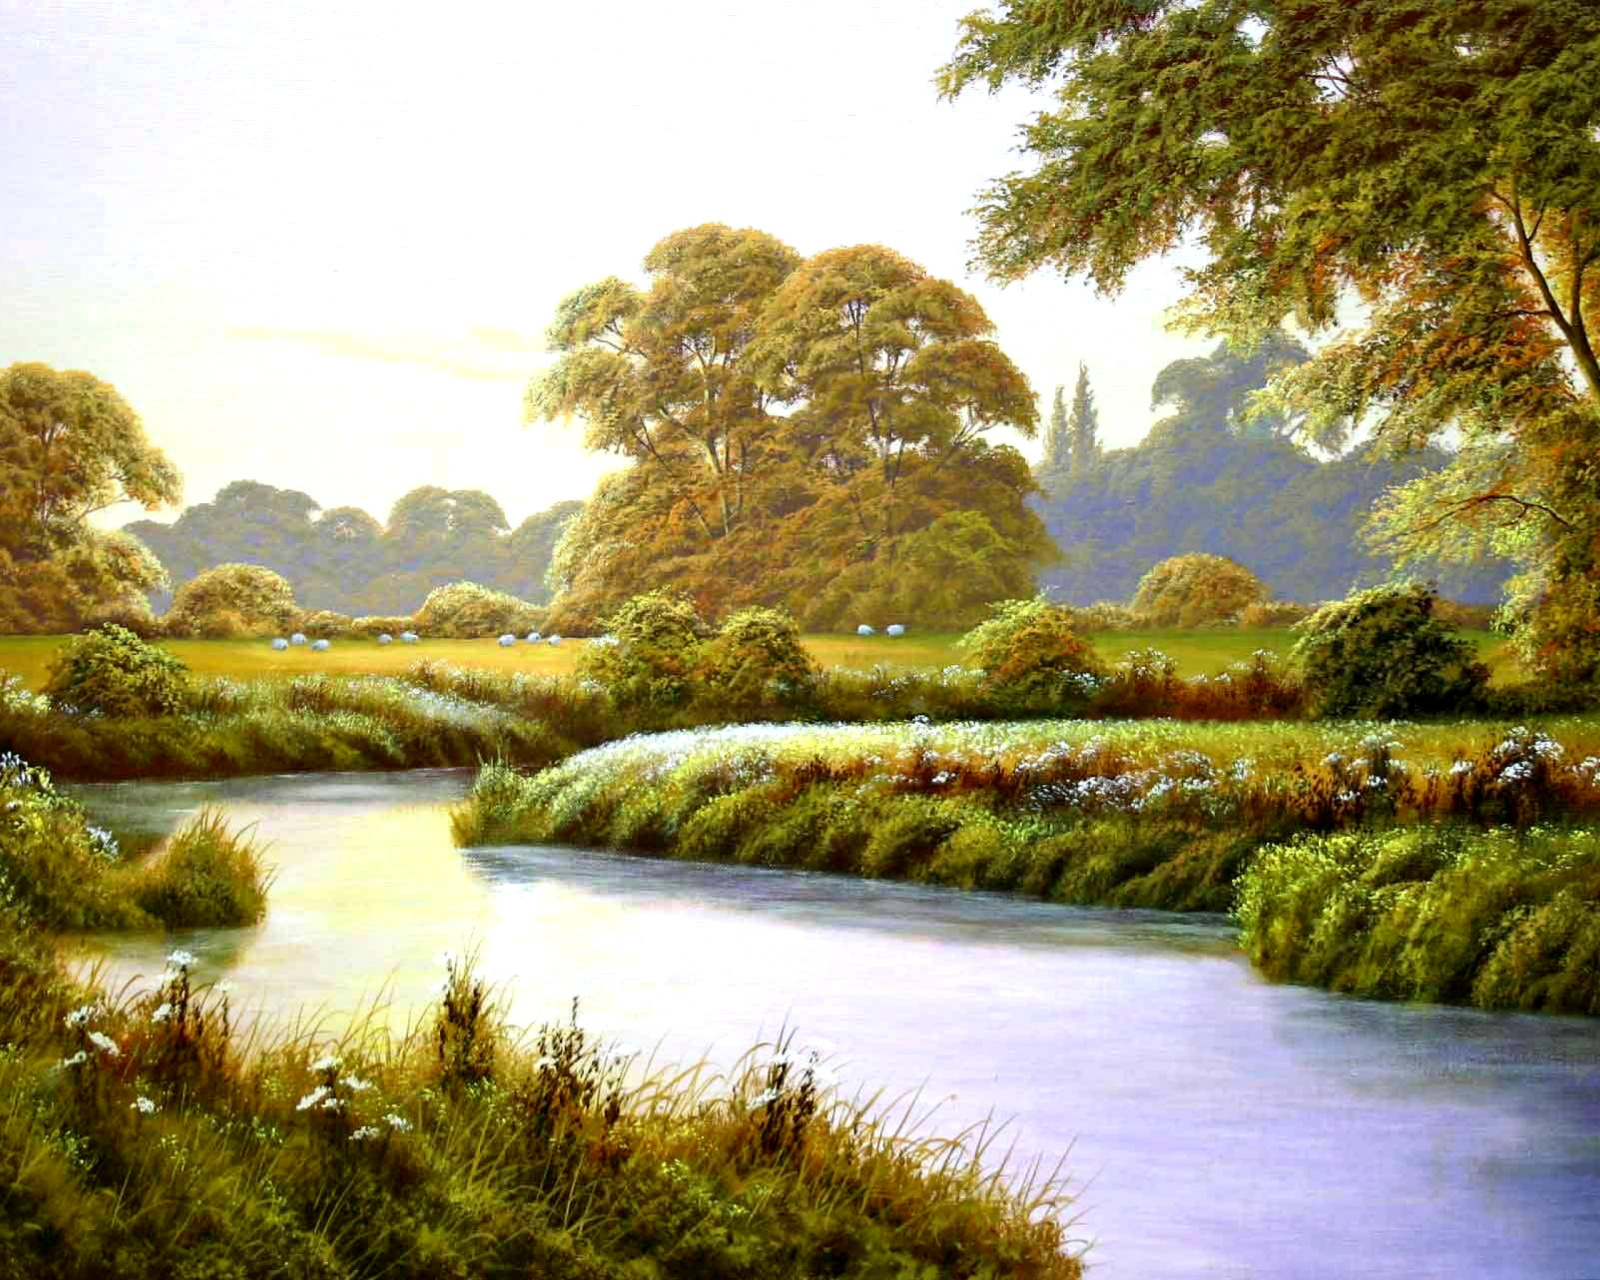 Terry Grundy Autumn Coming Landscape Painting screenshot #1 1600x1280